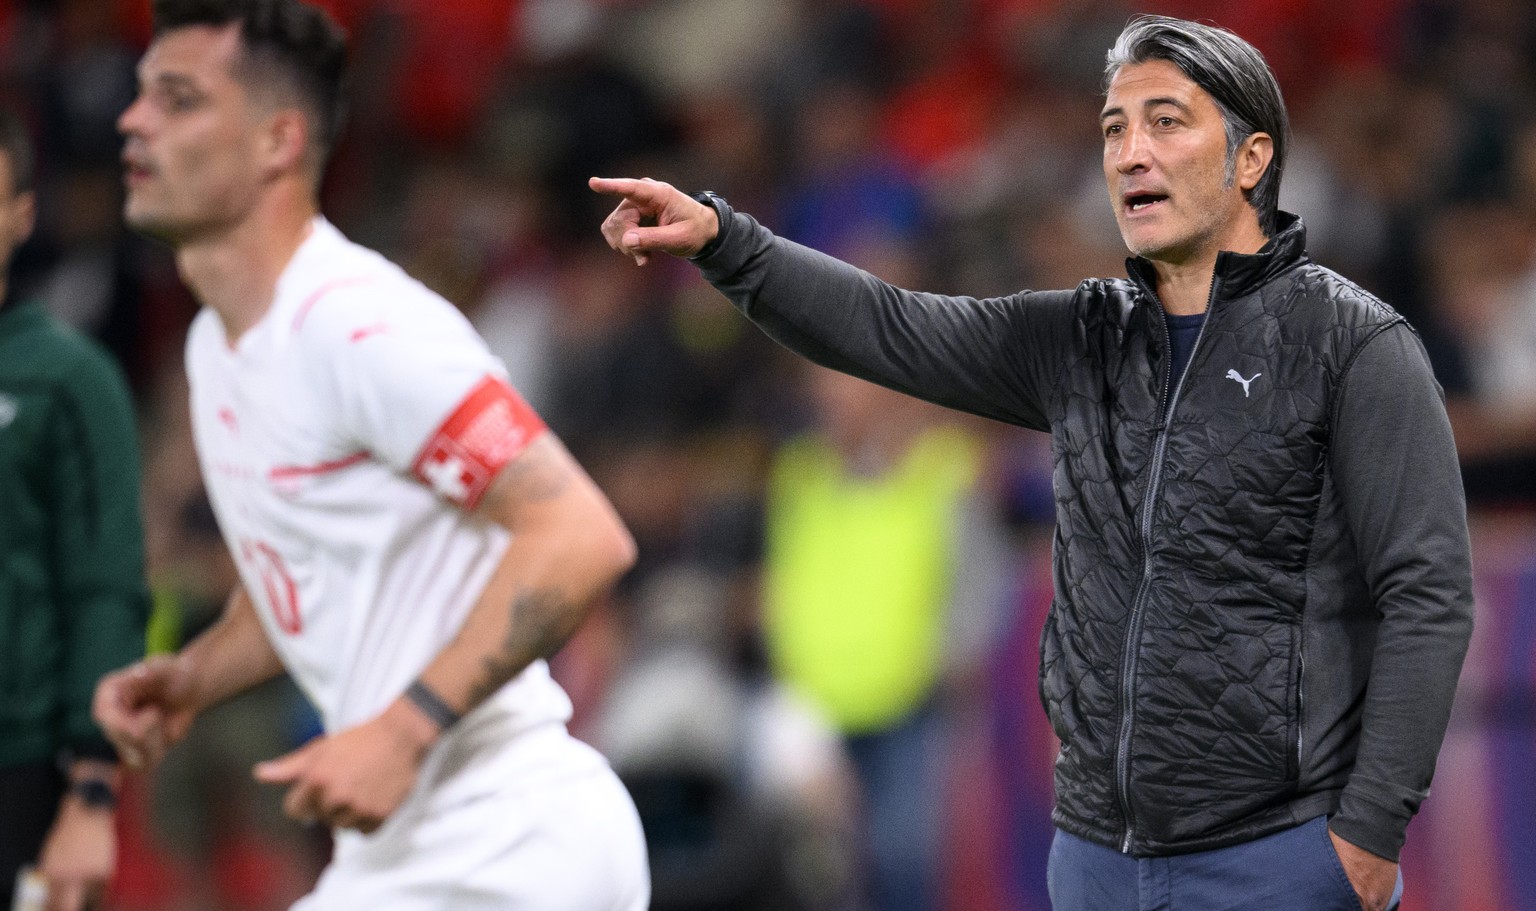 Switzerland&#039;s head coach Murat Yakin, right, gestures next to Switzerland&#039;s midfielder Granit Xhaka, left, during the UEFA Nations League group A2 soccer match between Czech Republic and Swi ...